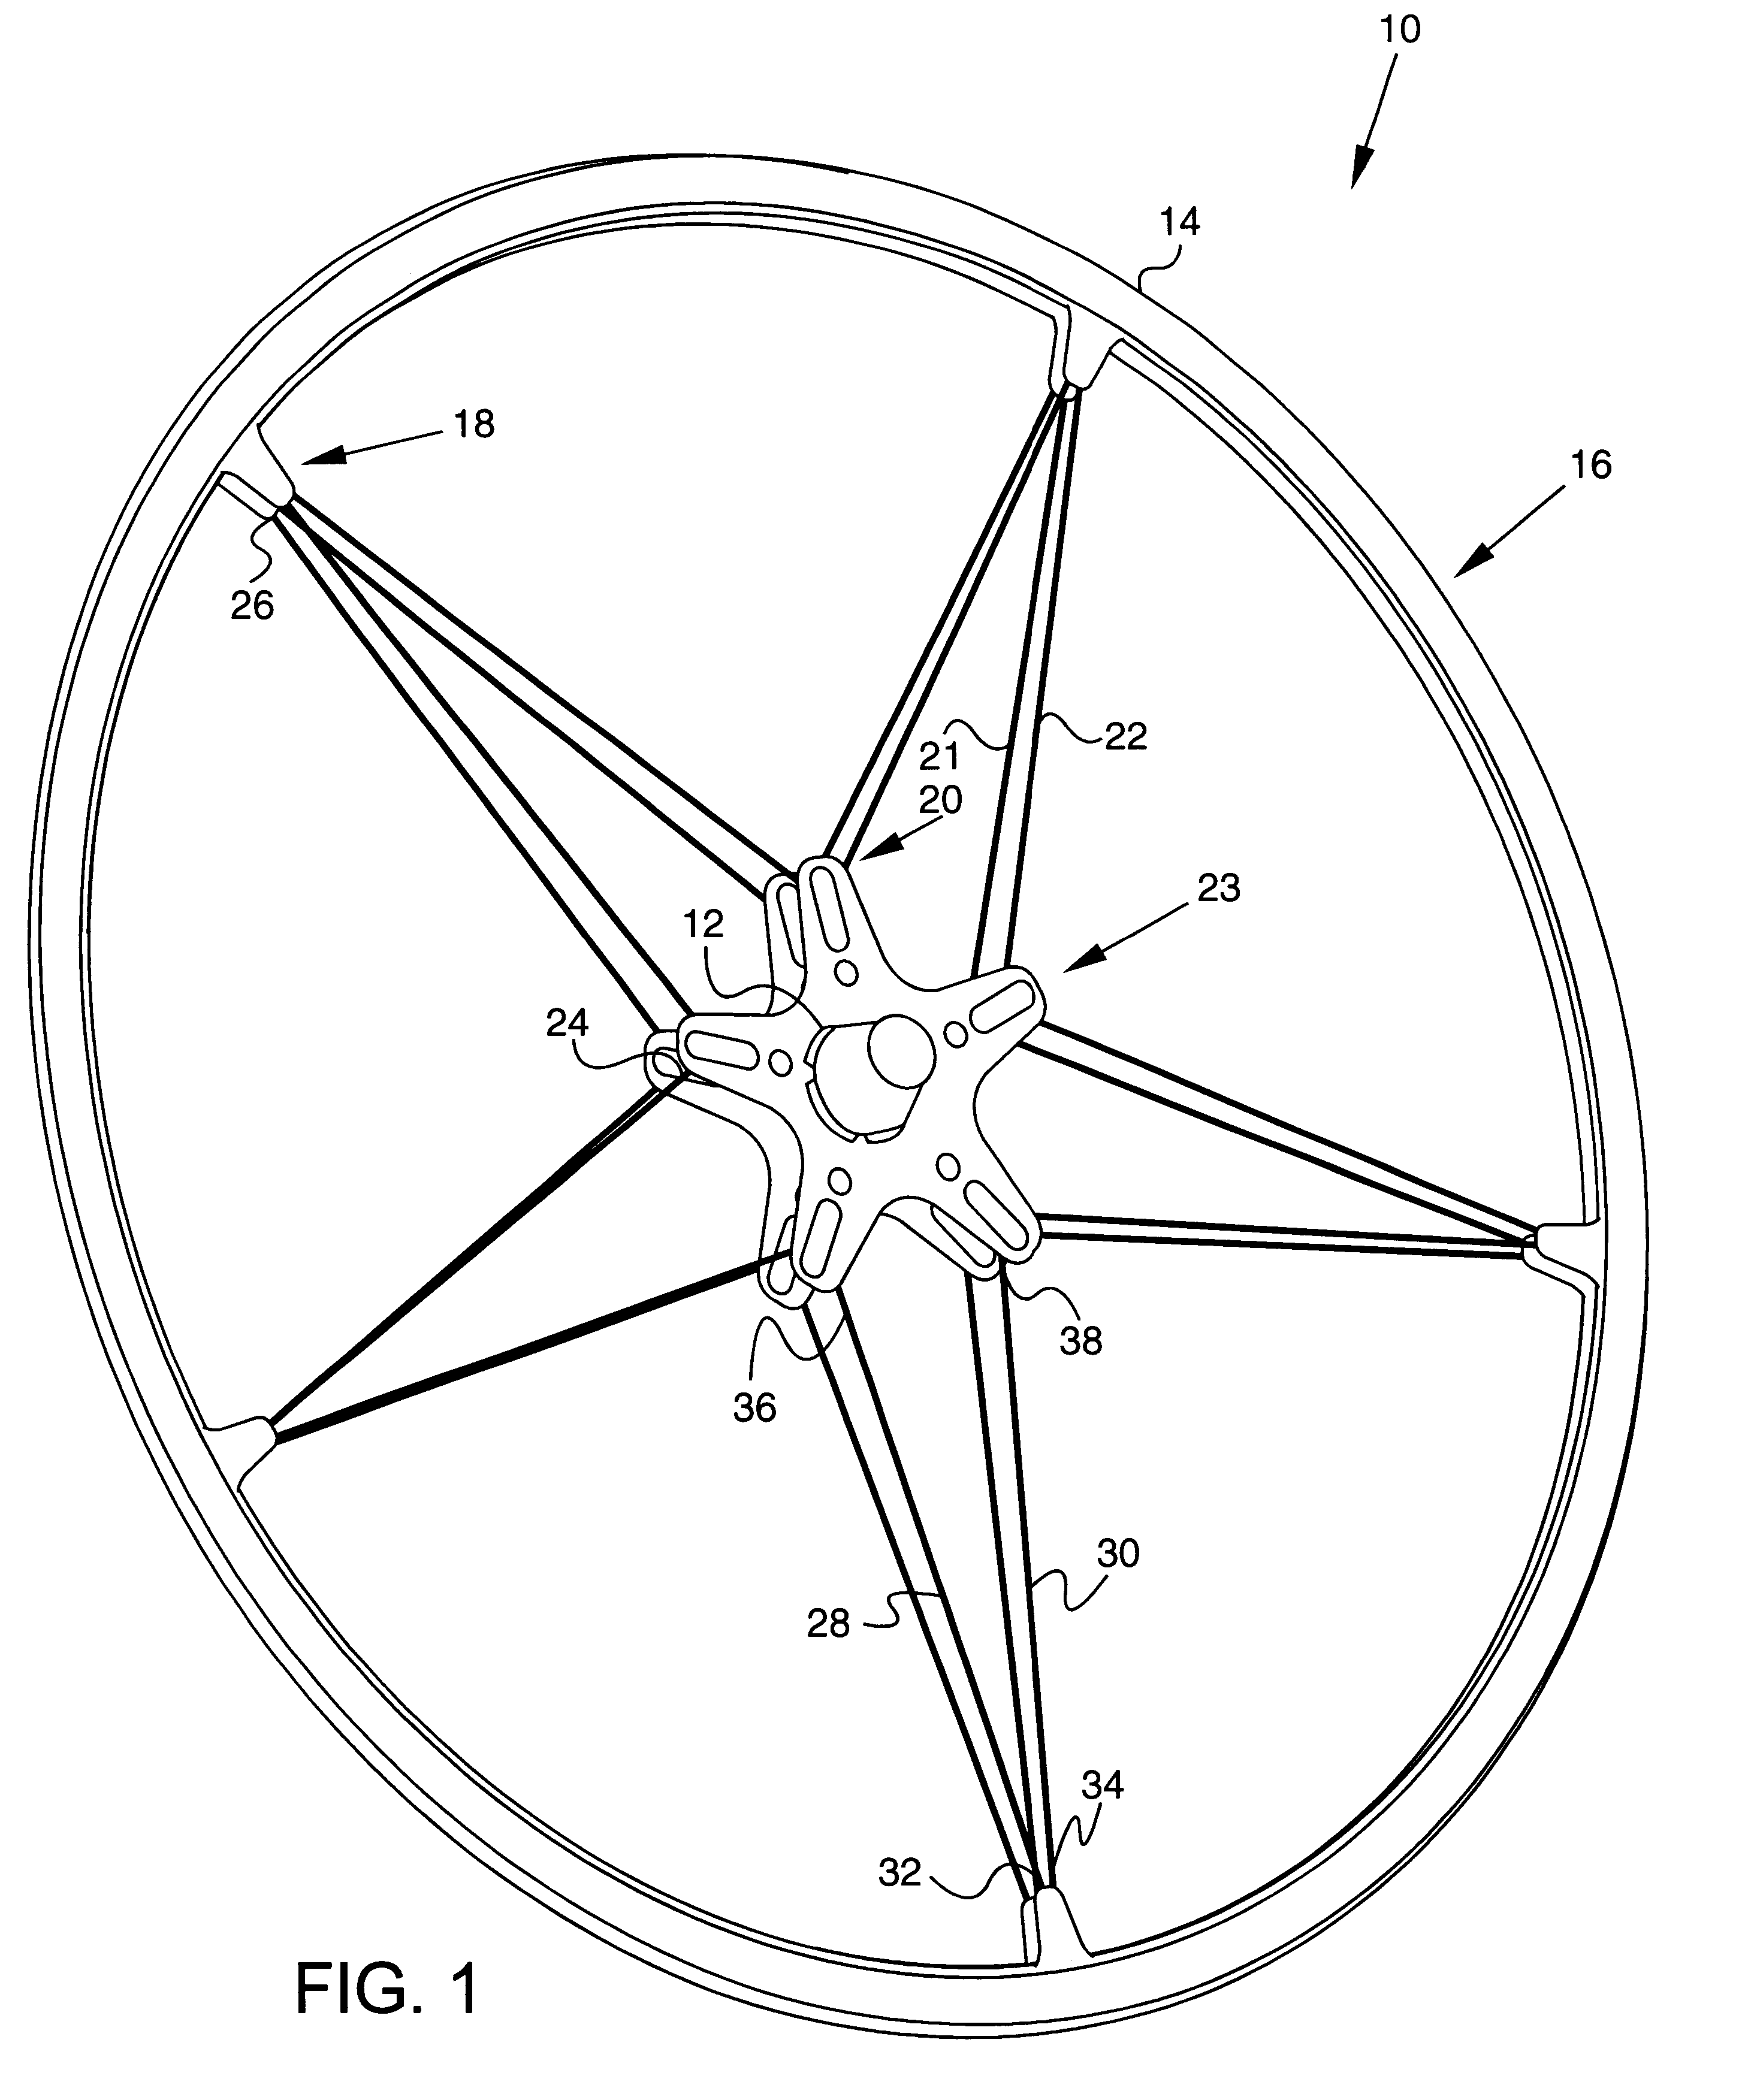 Wheel and tension spoke system